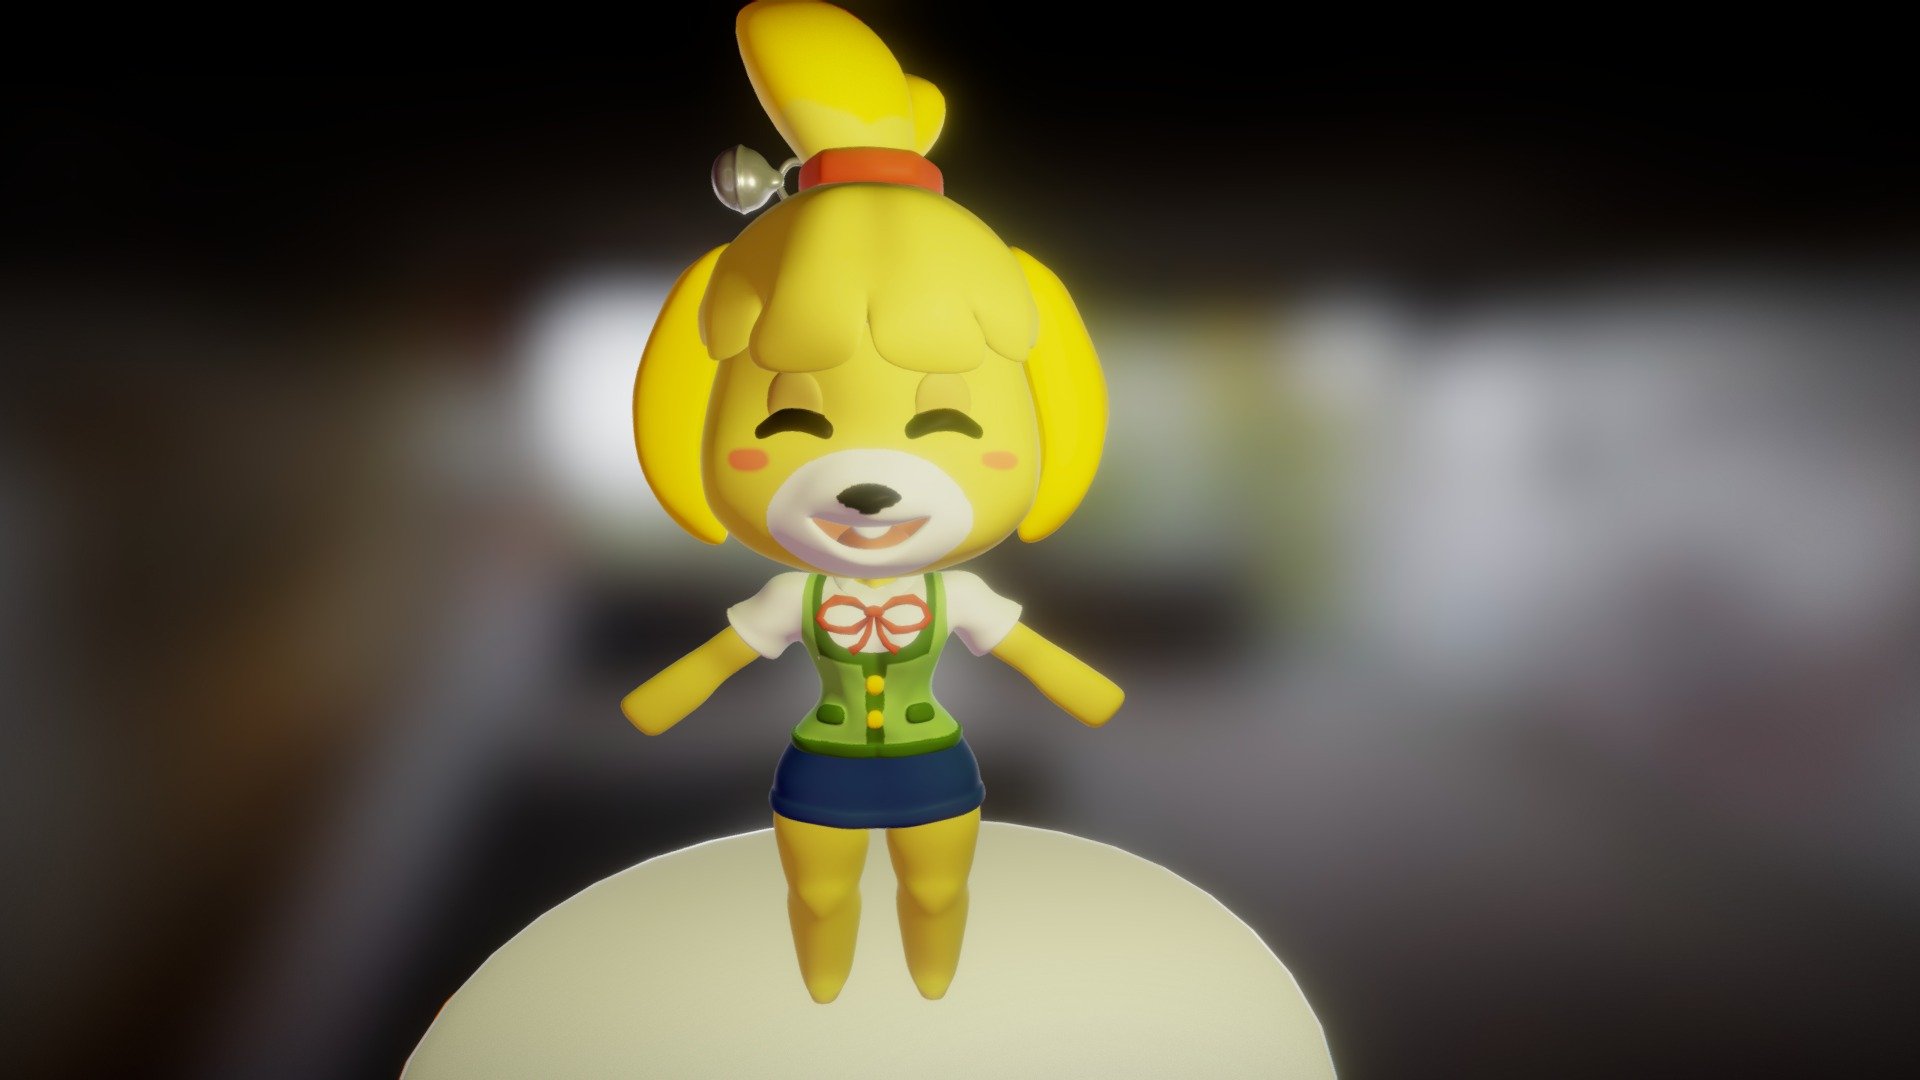 Animal crossing isabelle